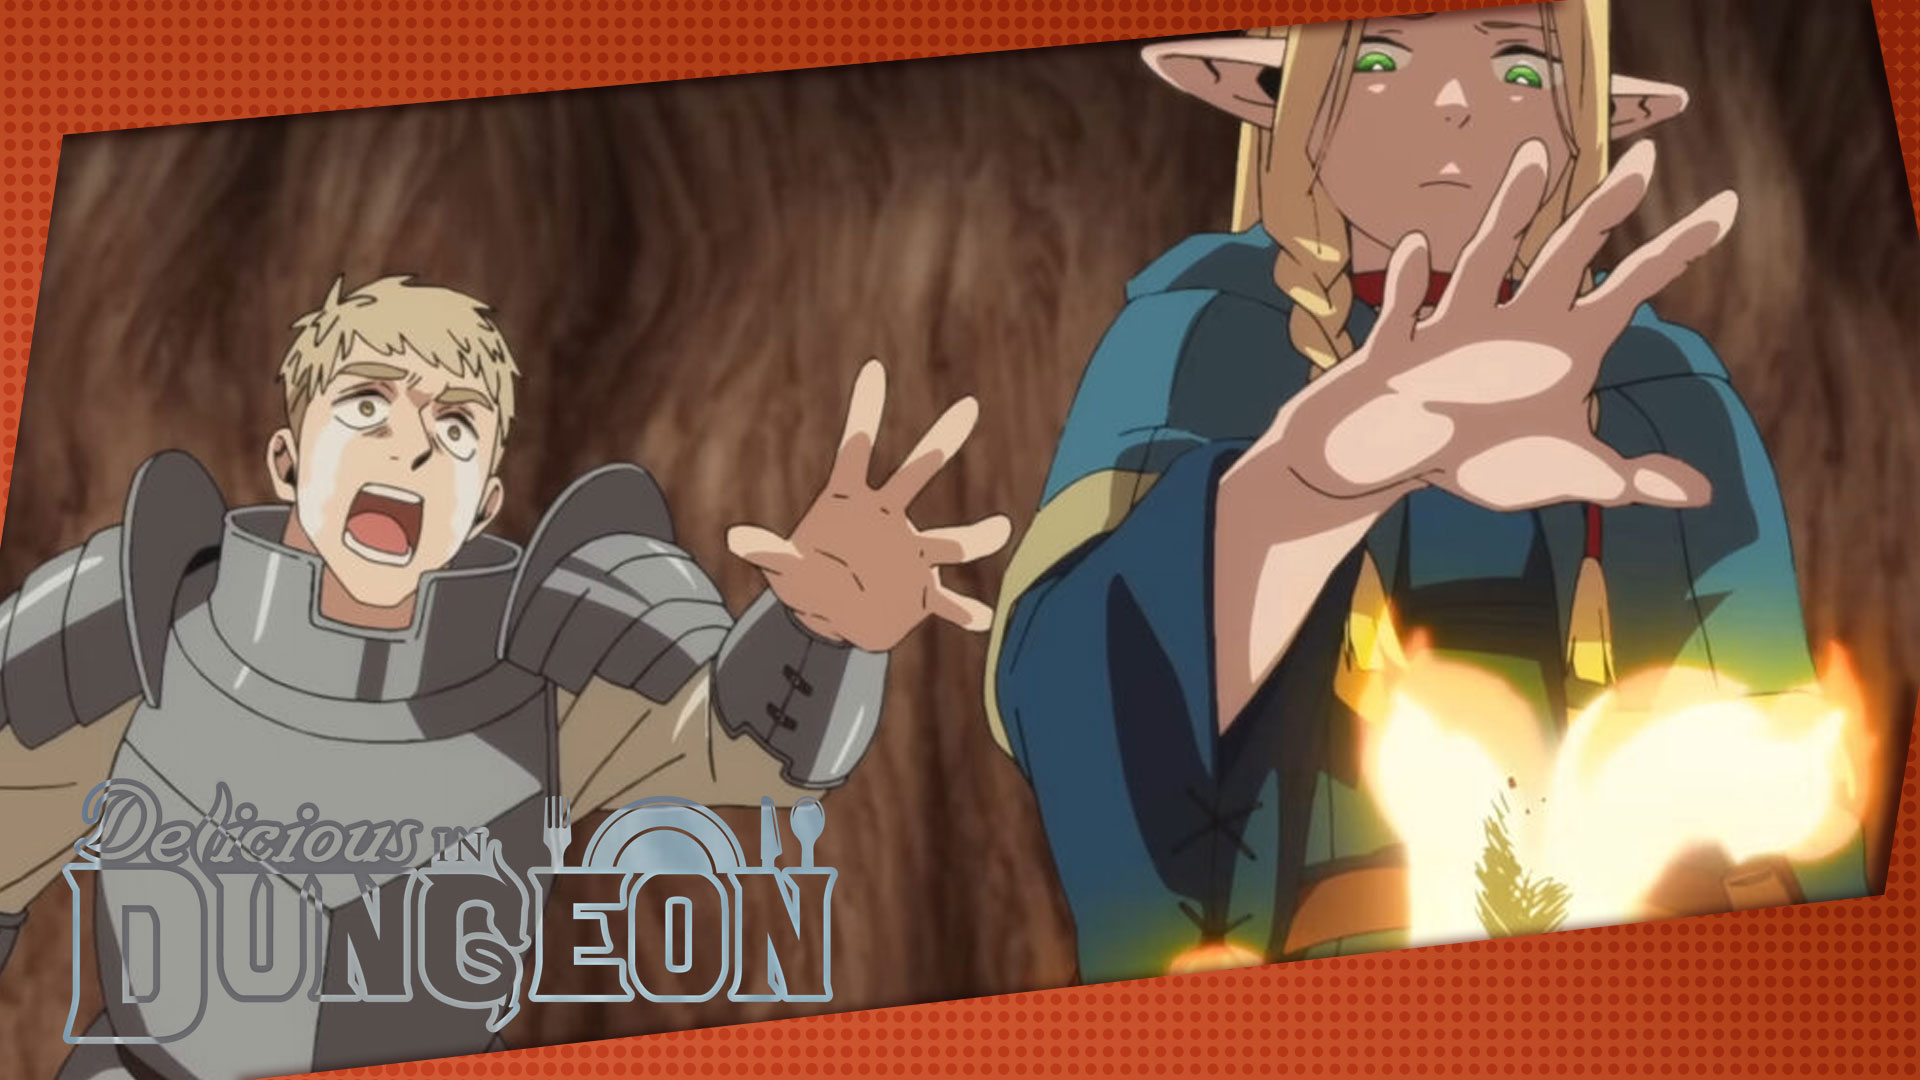 Delicious in Dungeon Doesn’t Have Unlikable Characters, According to Fans